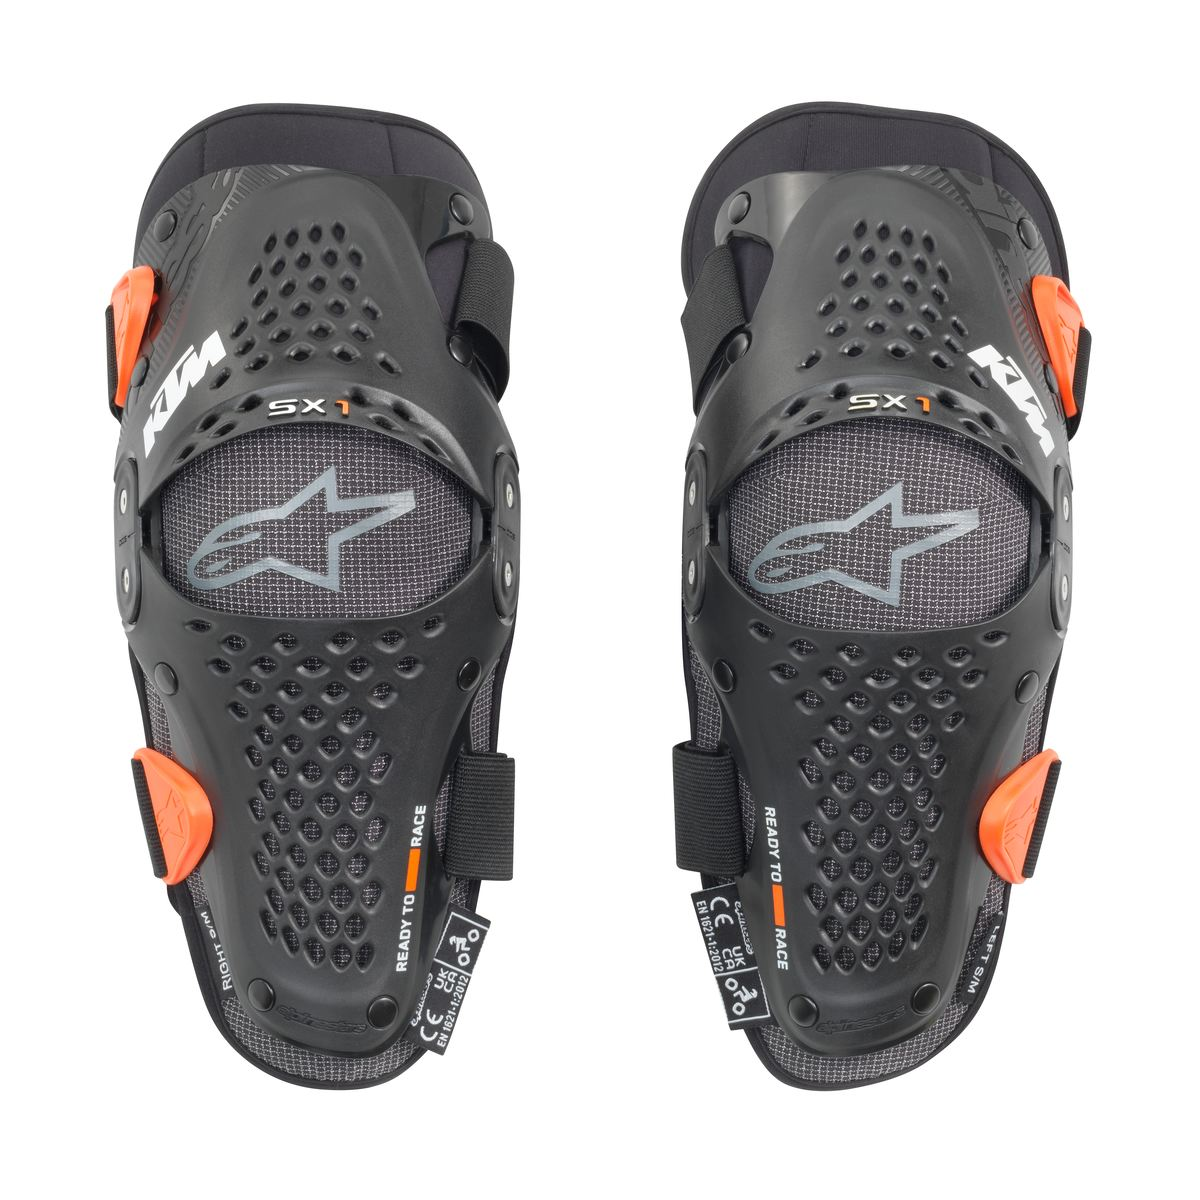 KTM SX-1 Youth Knee Protector